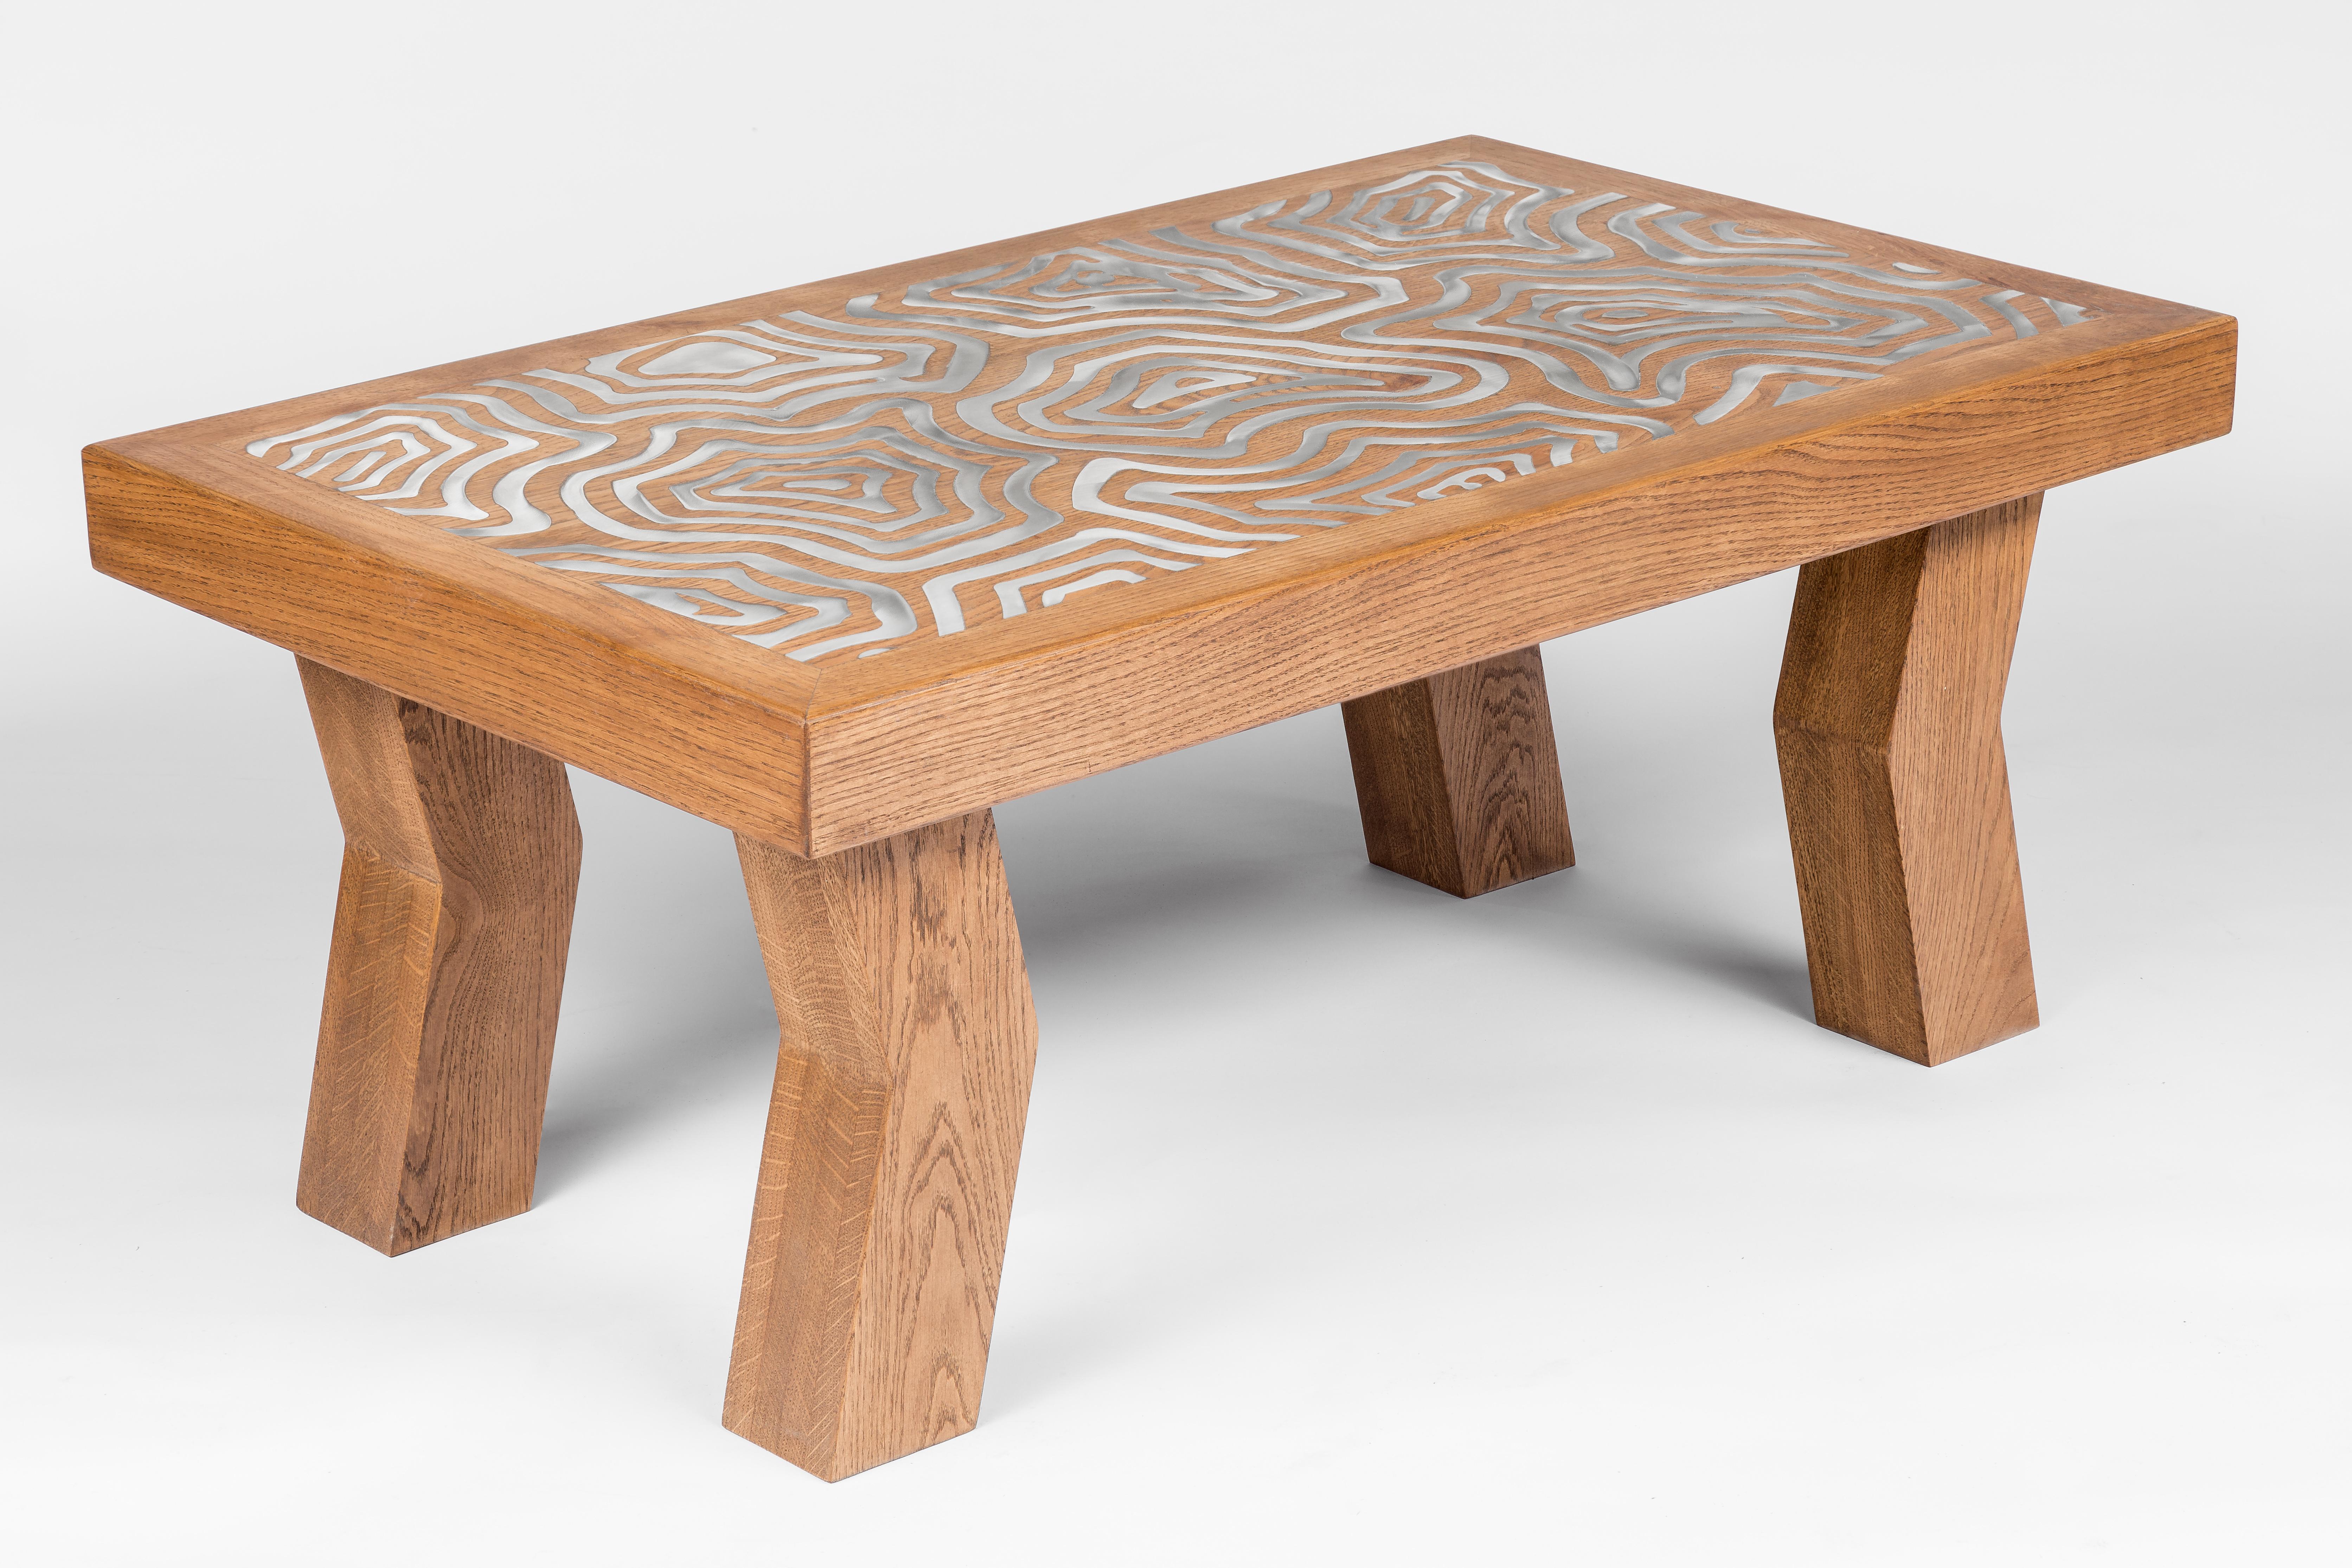 Cubist coffee table sculpted by Francesco Perini
Materials: Oak and steel
Dimensions: H 43 x W 101 x D 61 cm

Following a creative path that grew out of the founding of a company, I Vassalletti, known the world over for its extraordinary